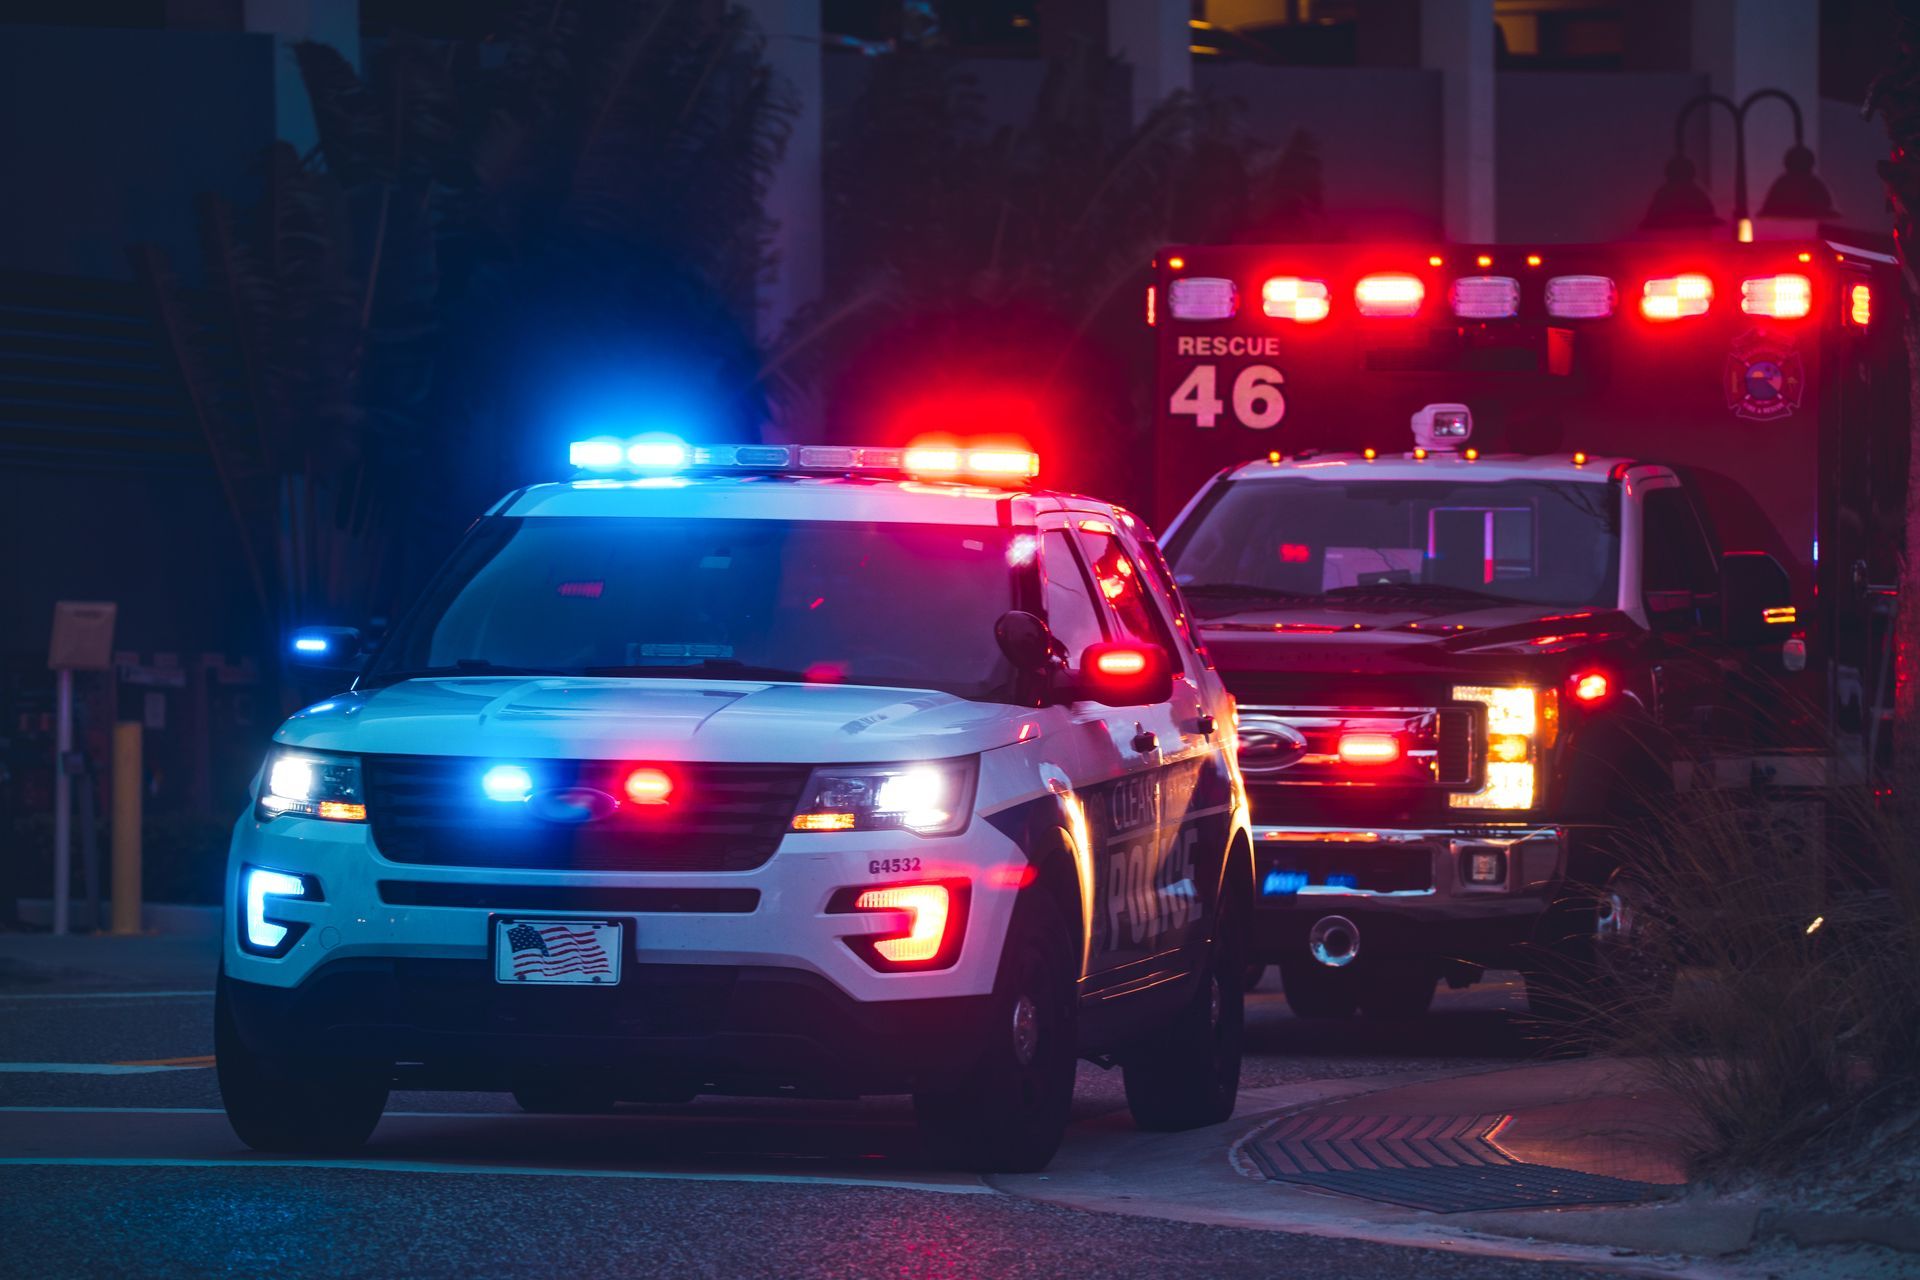 American Police Car and Emergency truck with Blue and red lights